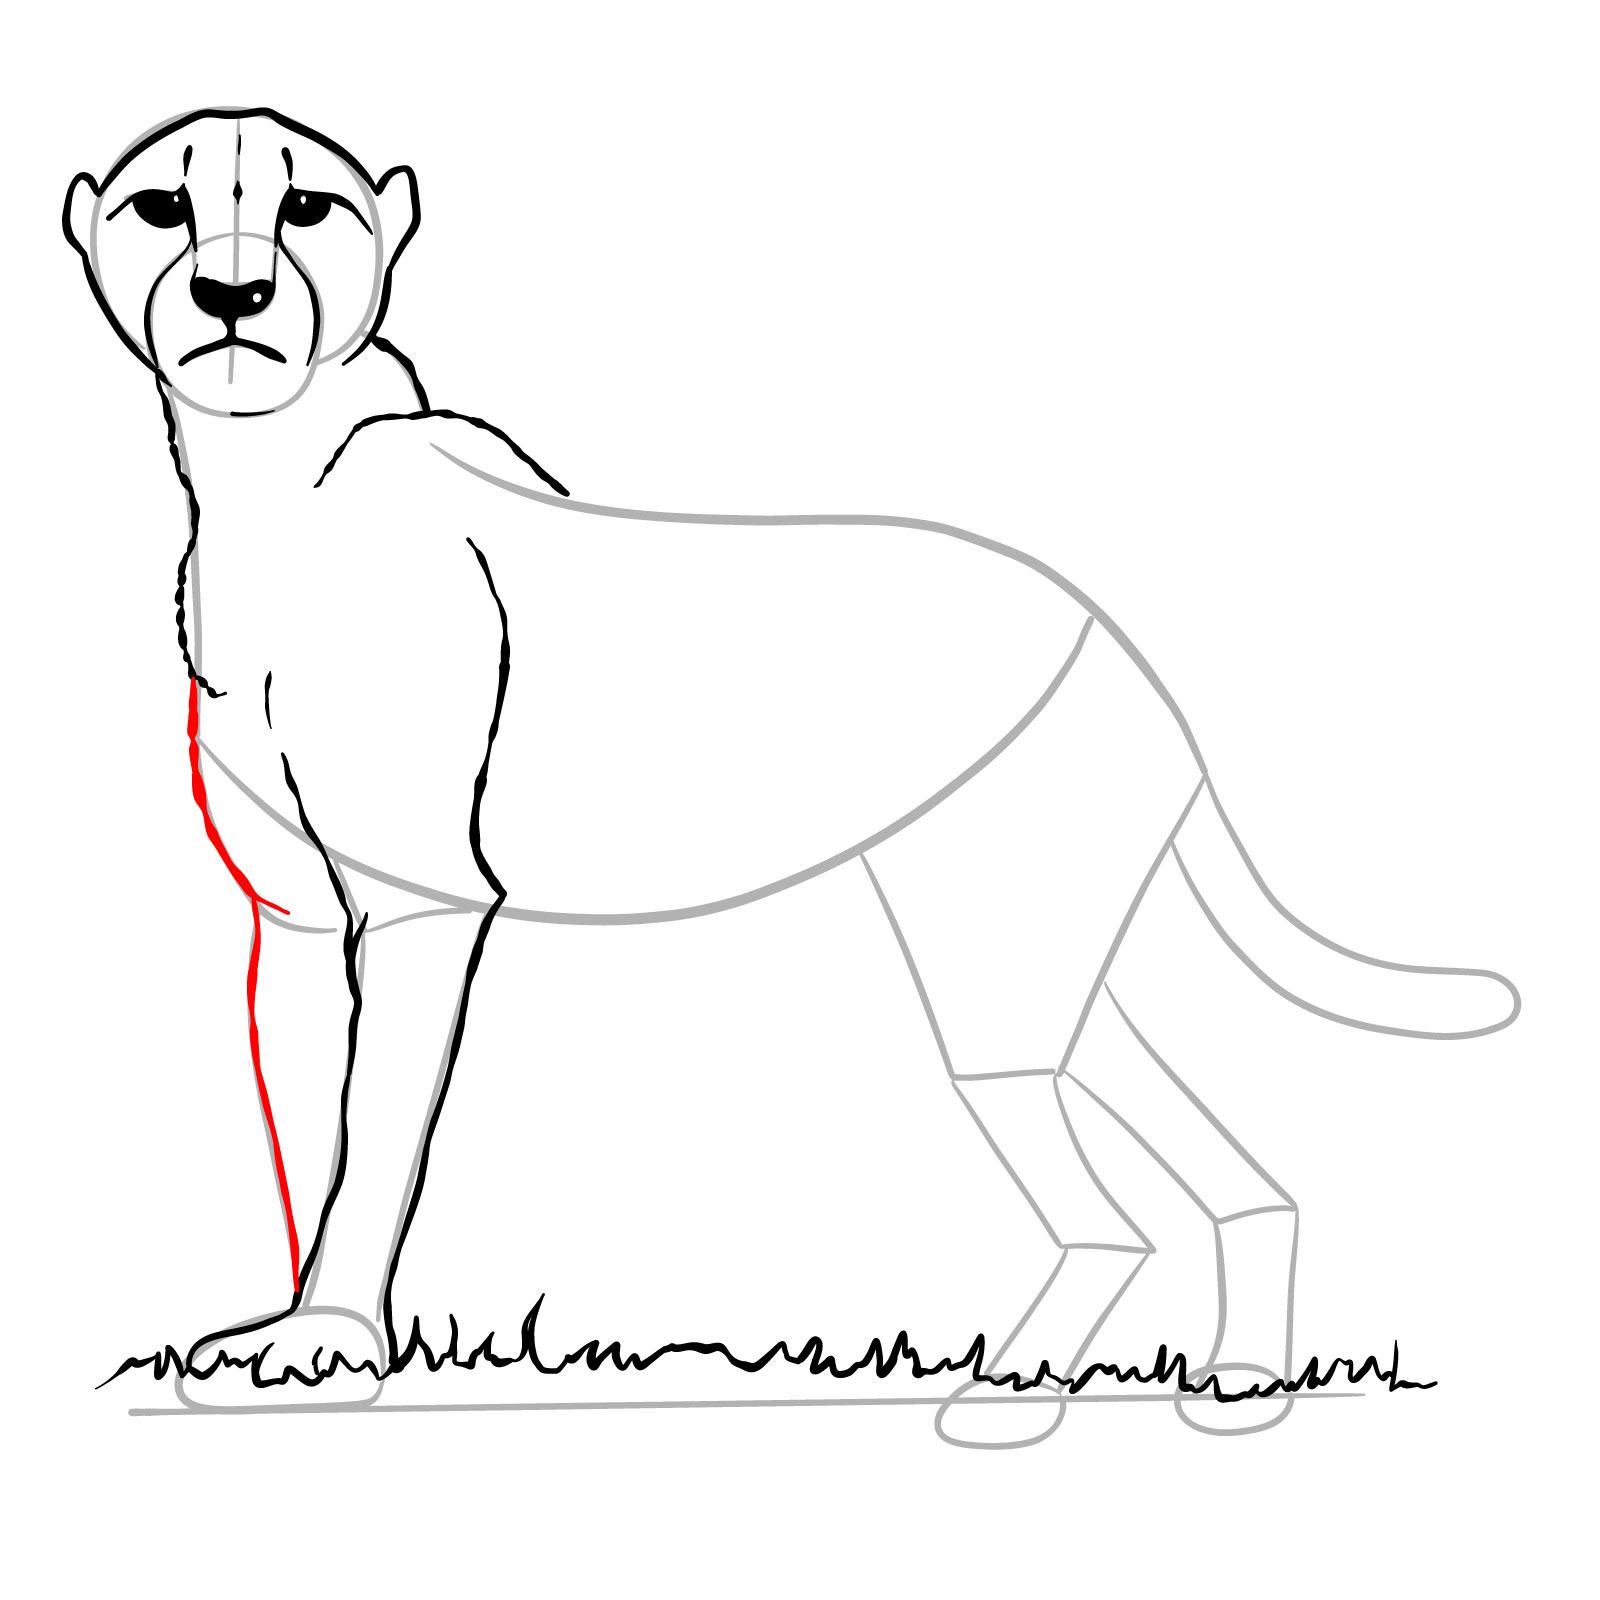 How to draw a Cheetah - step 17